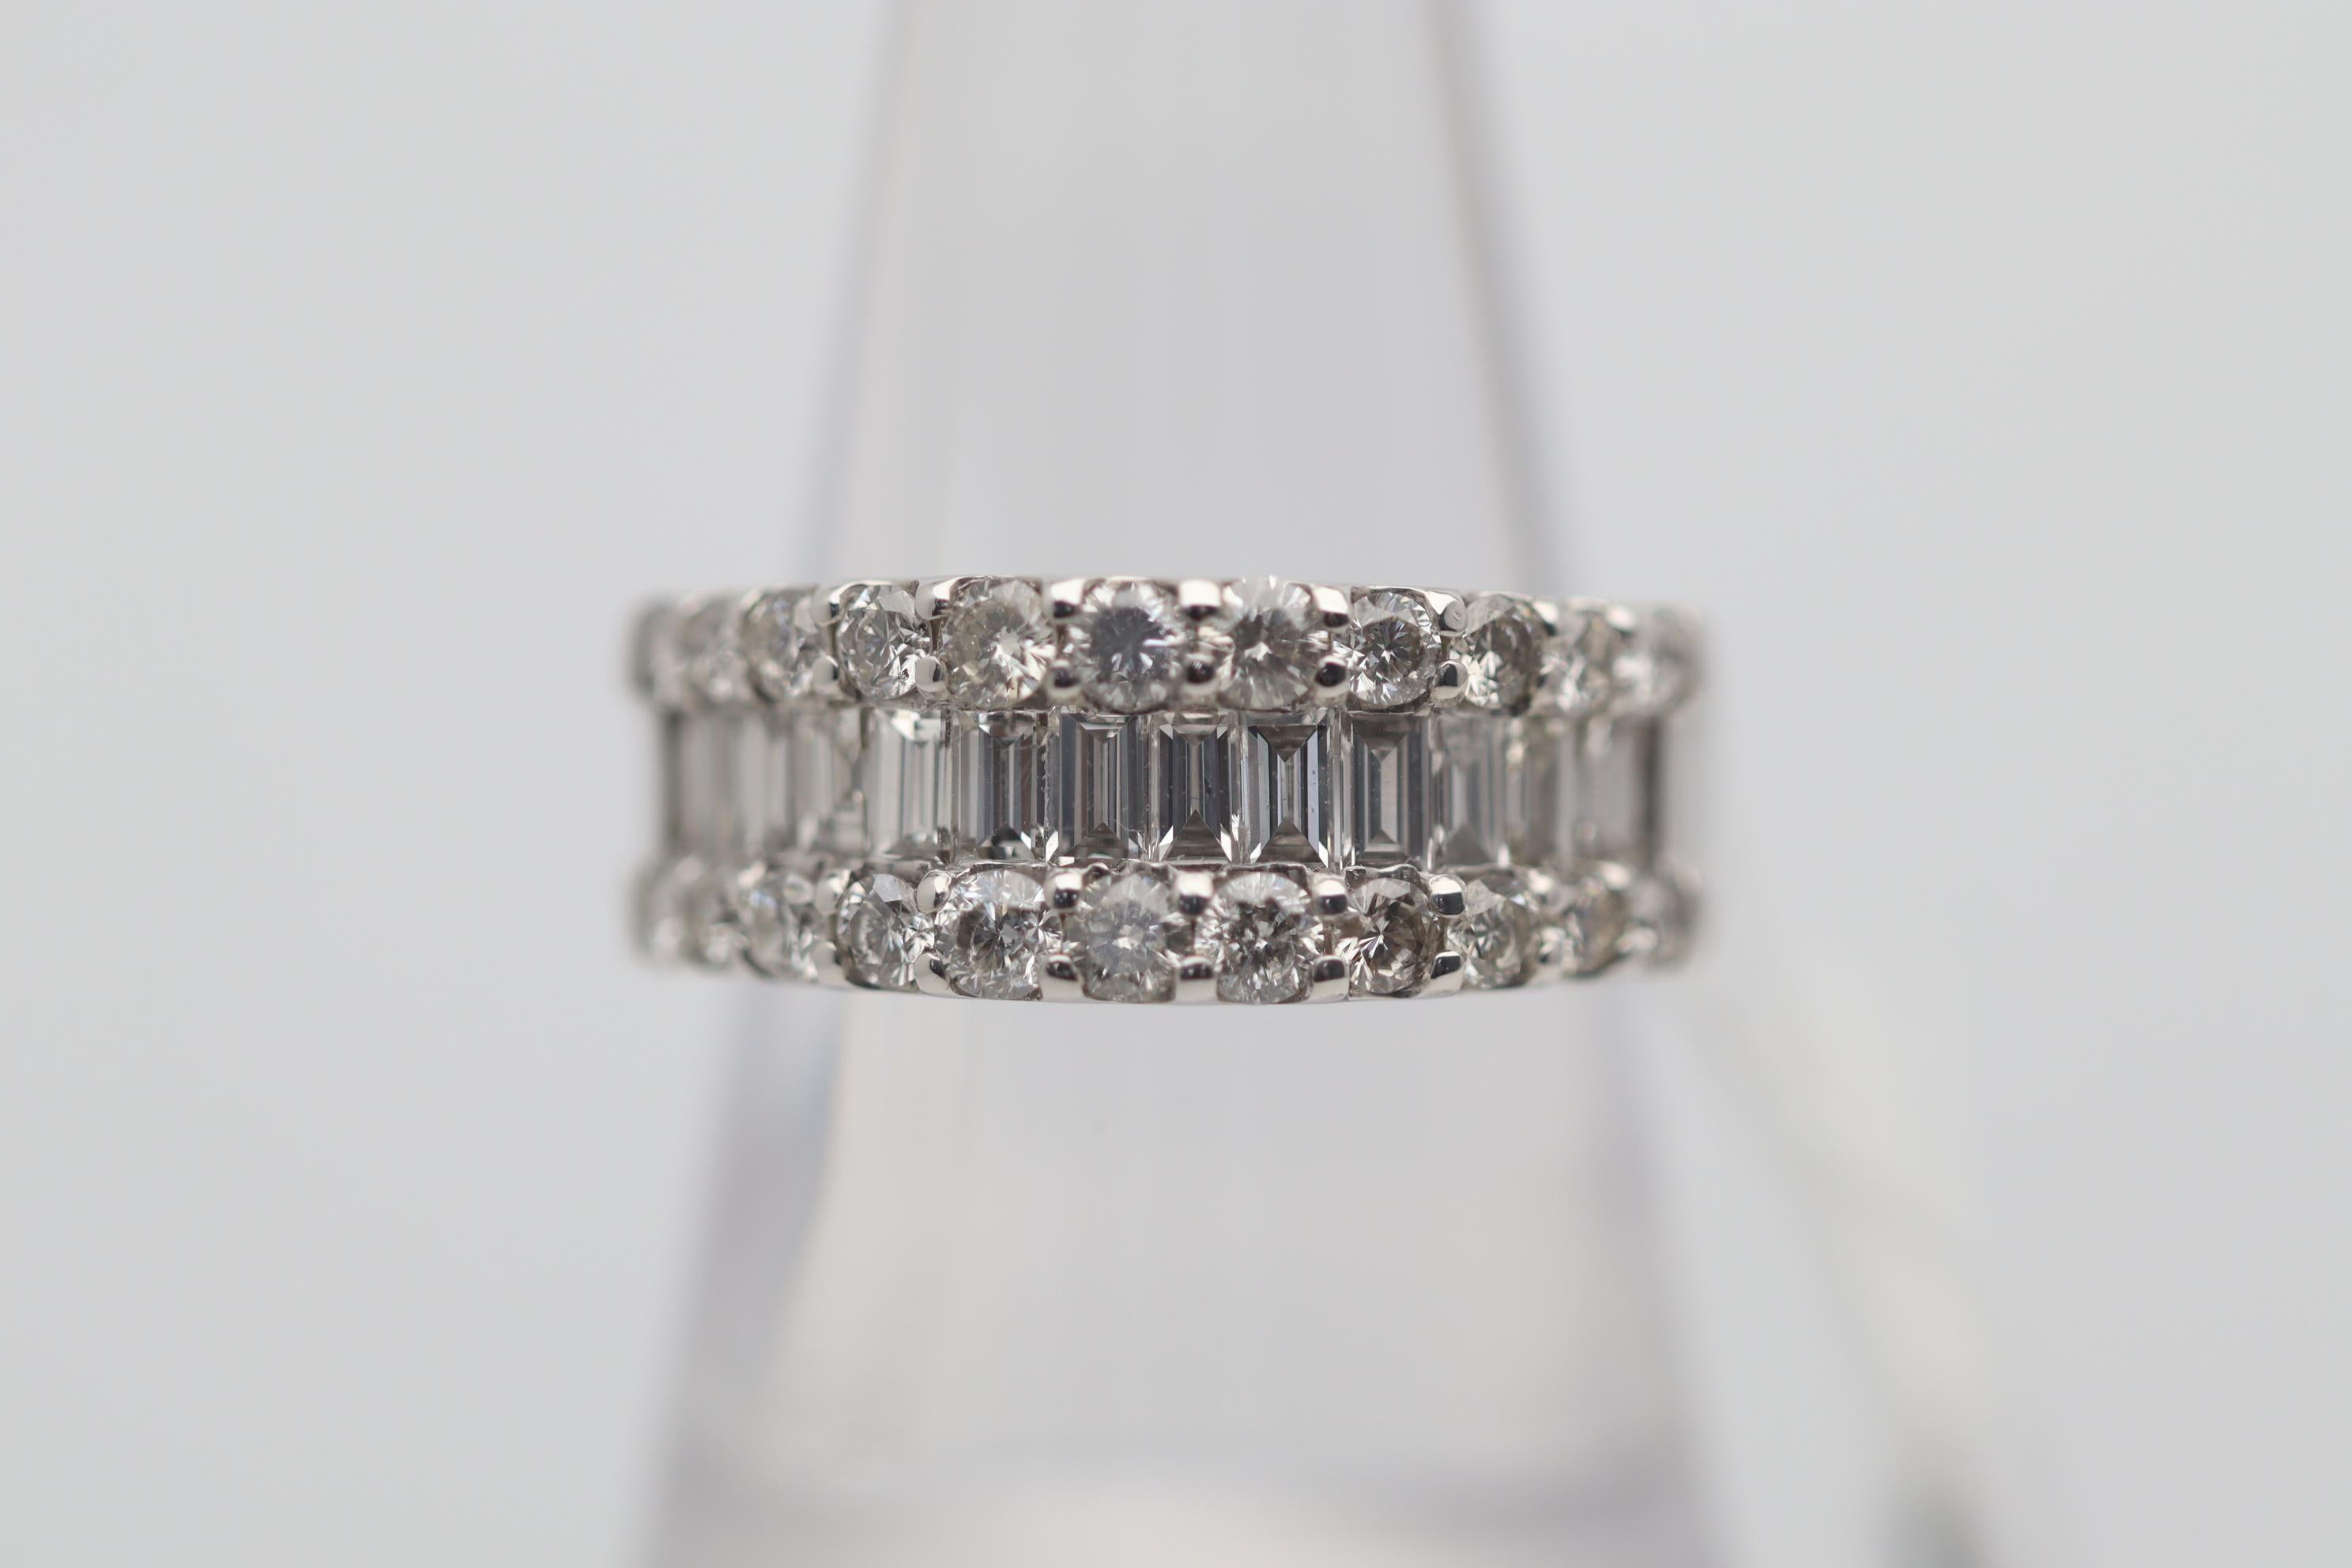 A chic and stylish platinum band featuring 3-rows of bright white diamonds. The two outer rows of diamonds are round brilliant-cuts while the center row is made of baguette-cut diamonds which are channel-set by each other. The diamonds weigh a total